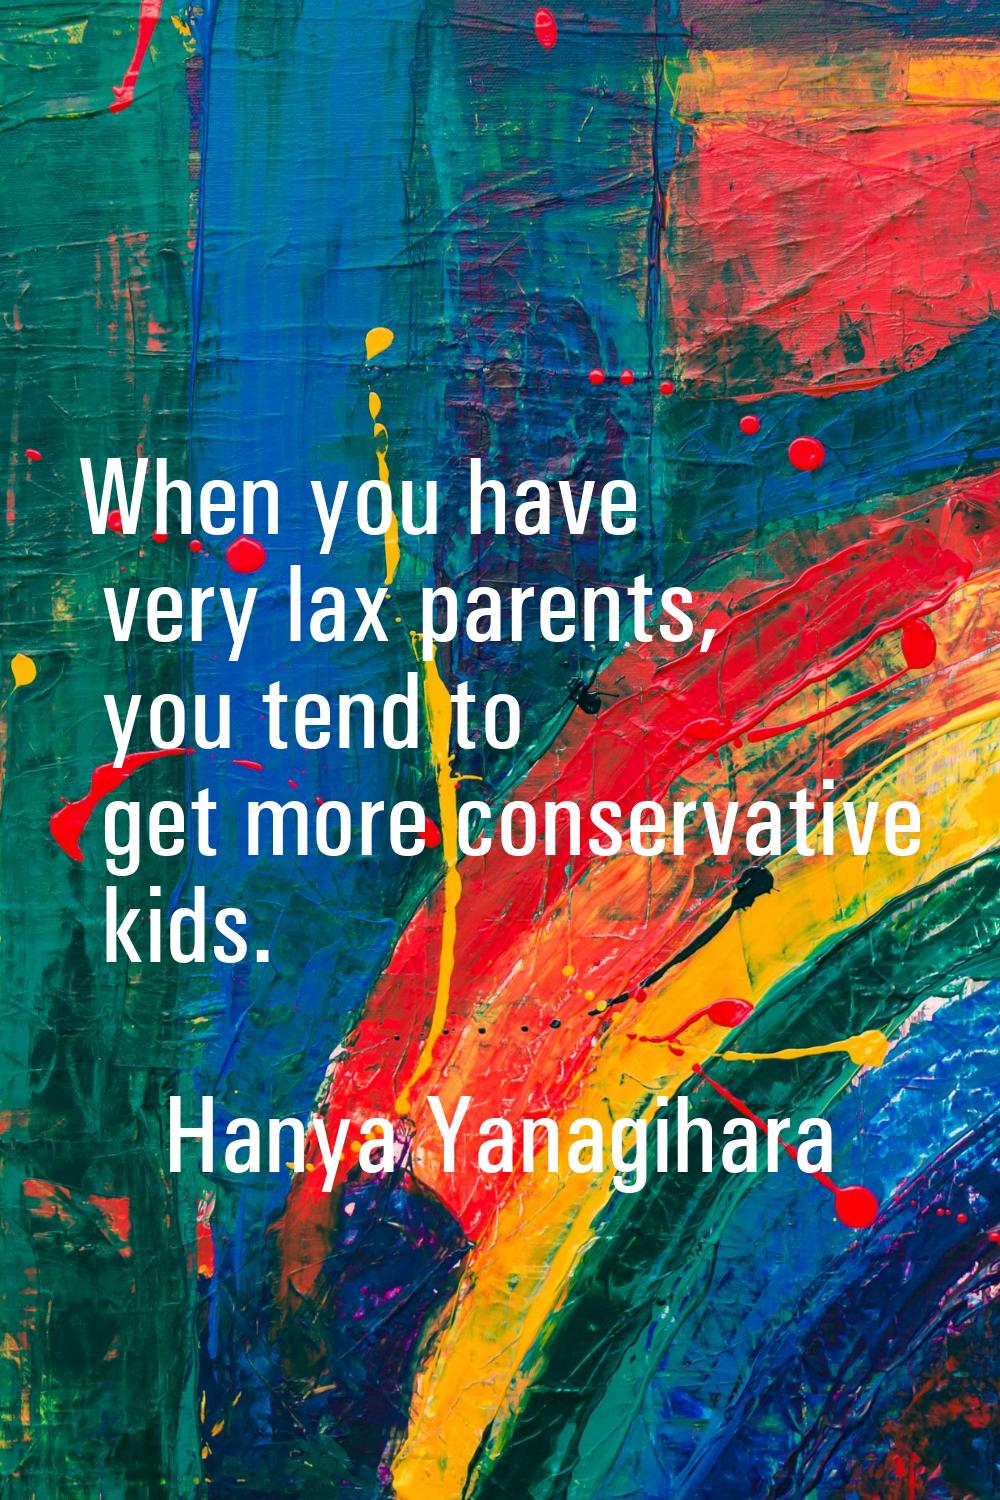 When you have very lax parents, you tend to get more conservative kids.